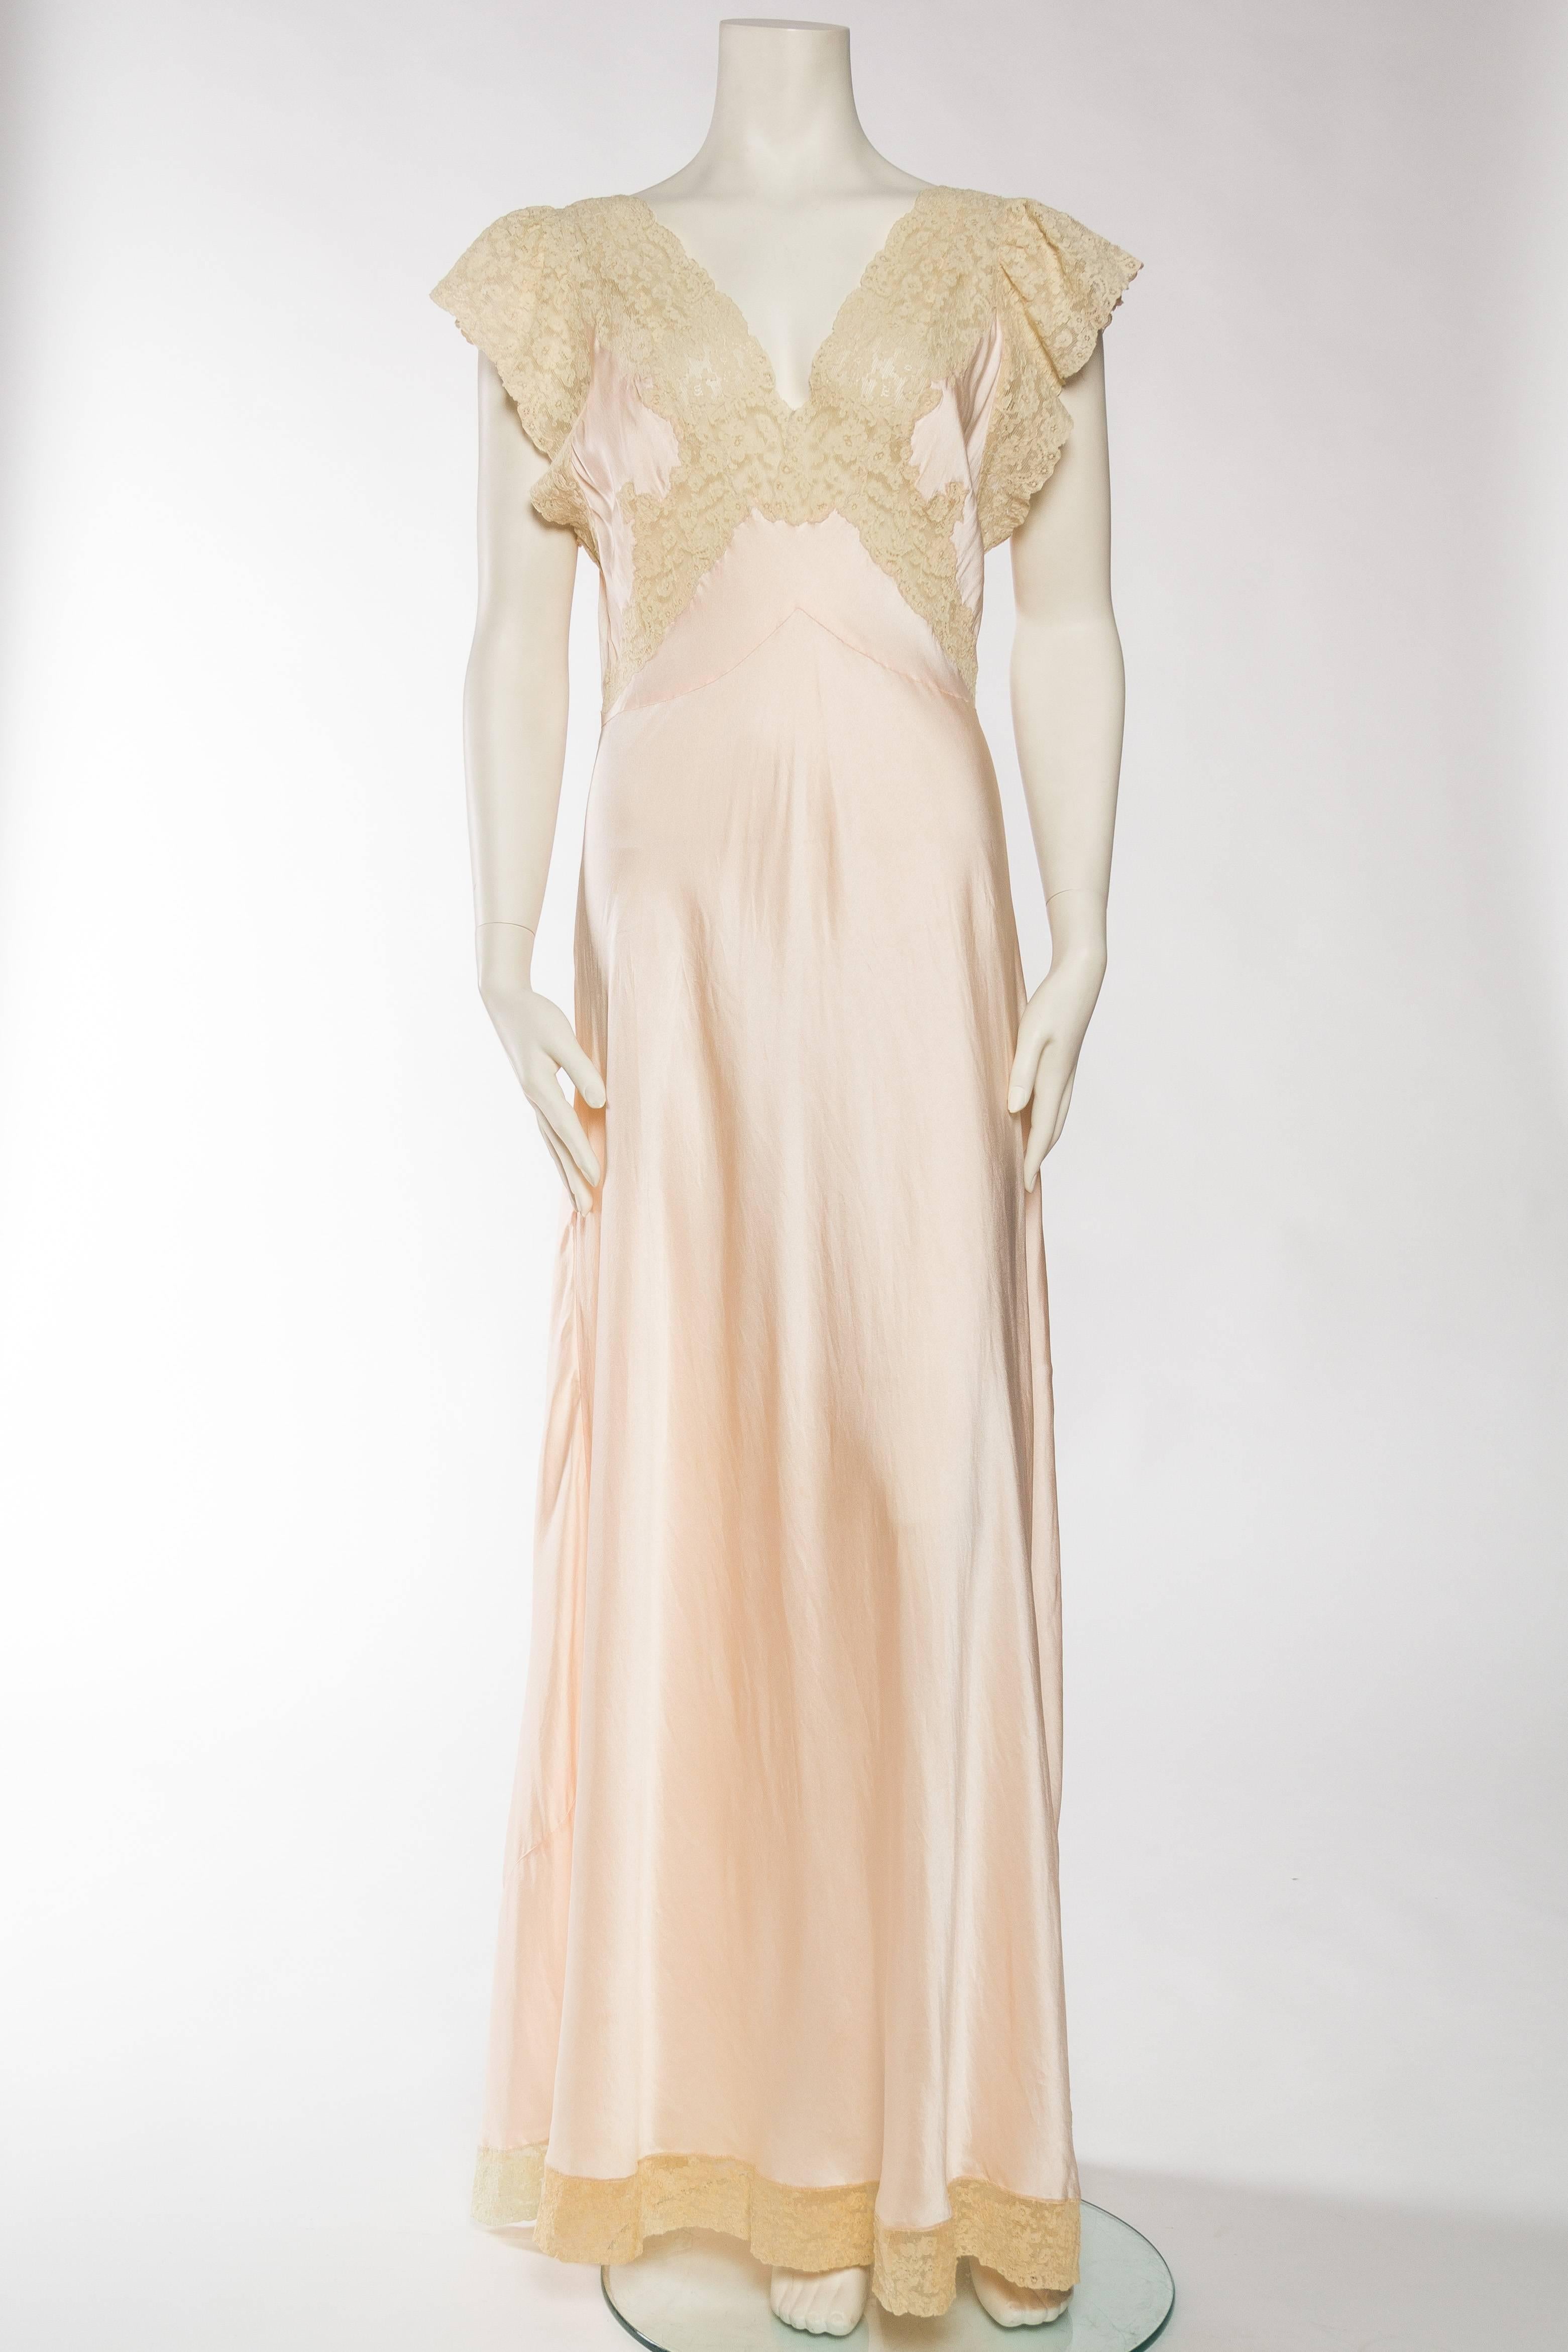 Dating from the 1930s/40s this negligee is a rare silk one, not rayon like many from the era. Most likely made in France where these superior slip dresses were made. 